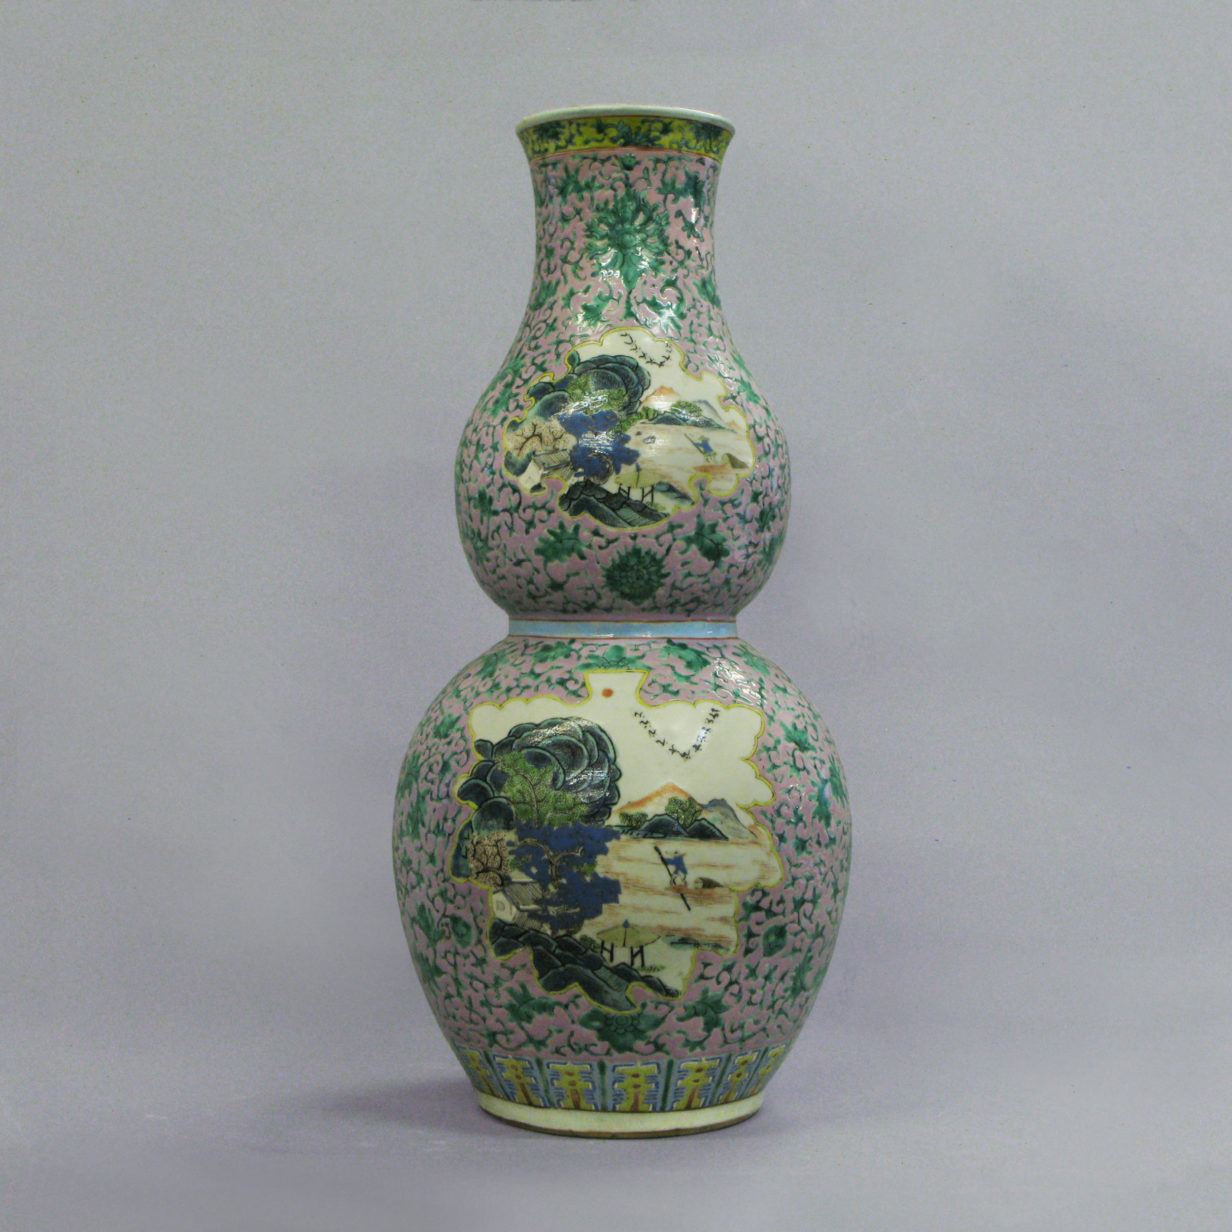 A qing dynasty double gourd vase